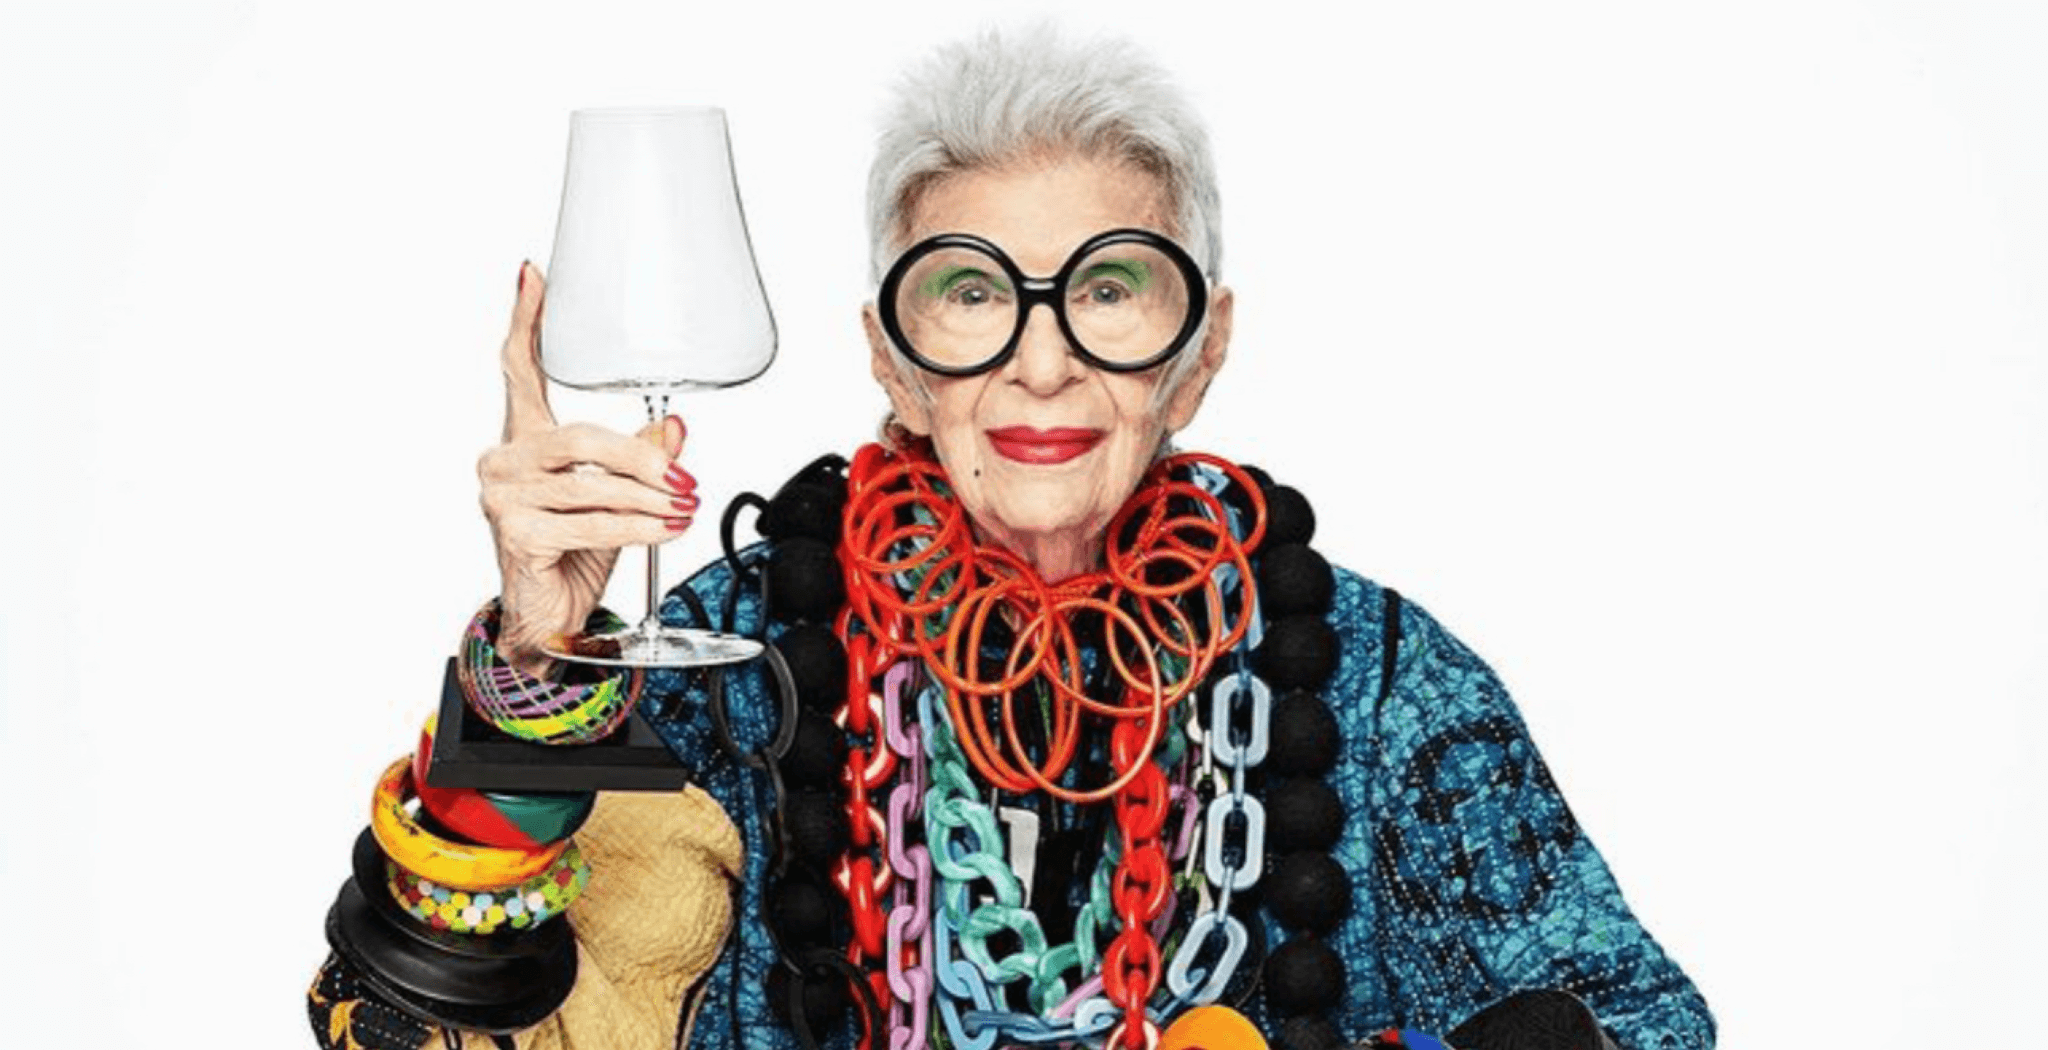 An old women, Iris Apfel is holding a wineglass